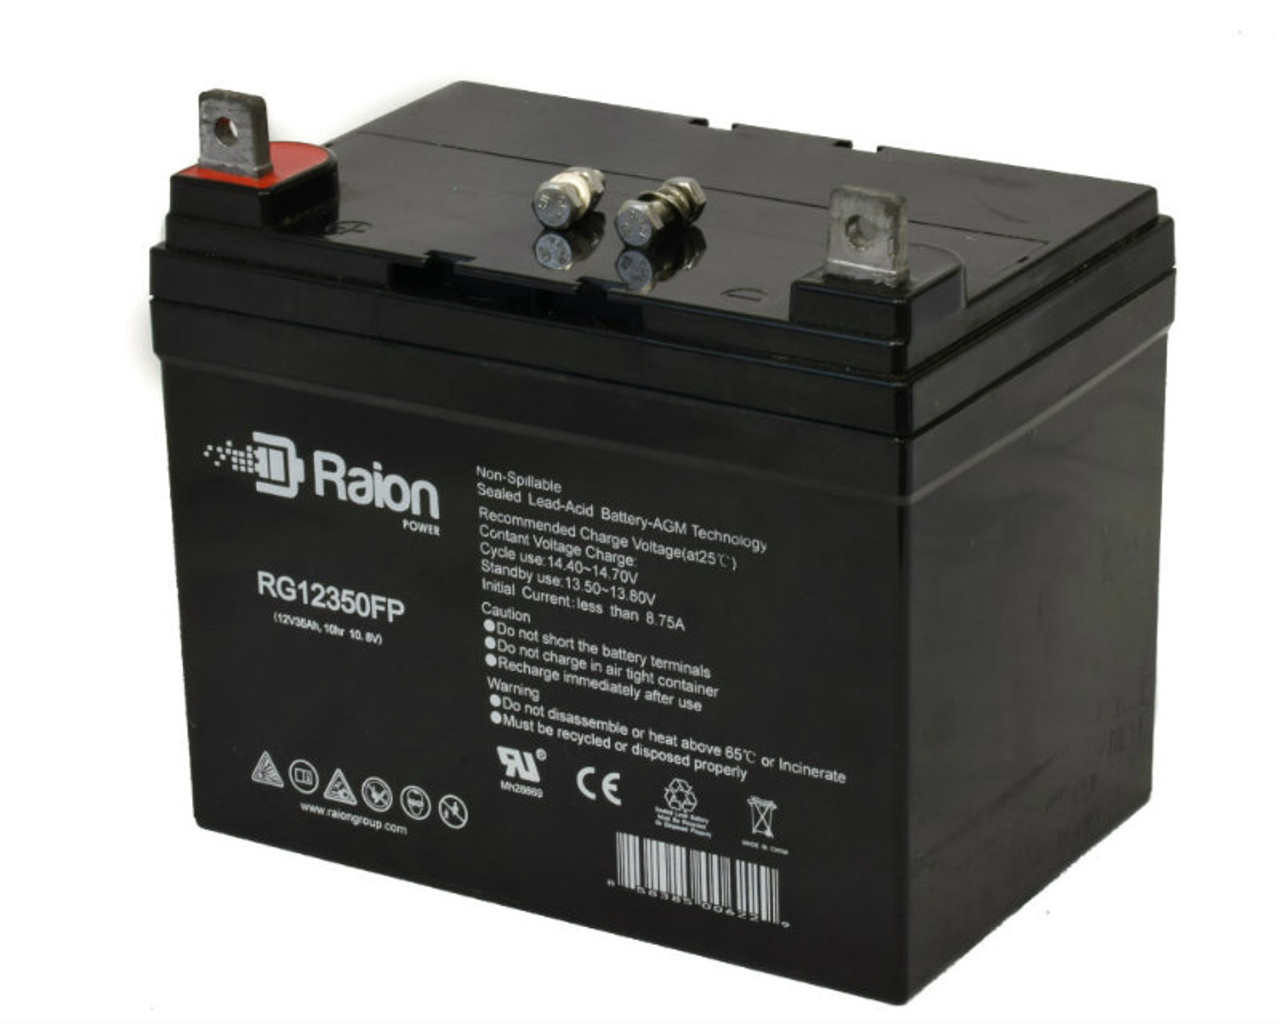 Raion Power Replacement 12V 35Ah RG12350FP Mobility Scooter Battery for Drive Medical Cirrus Plus